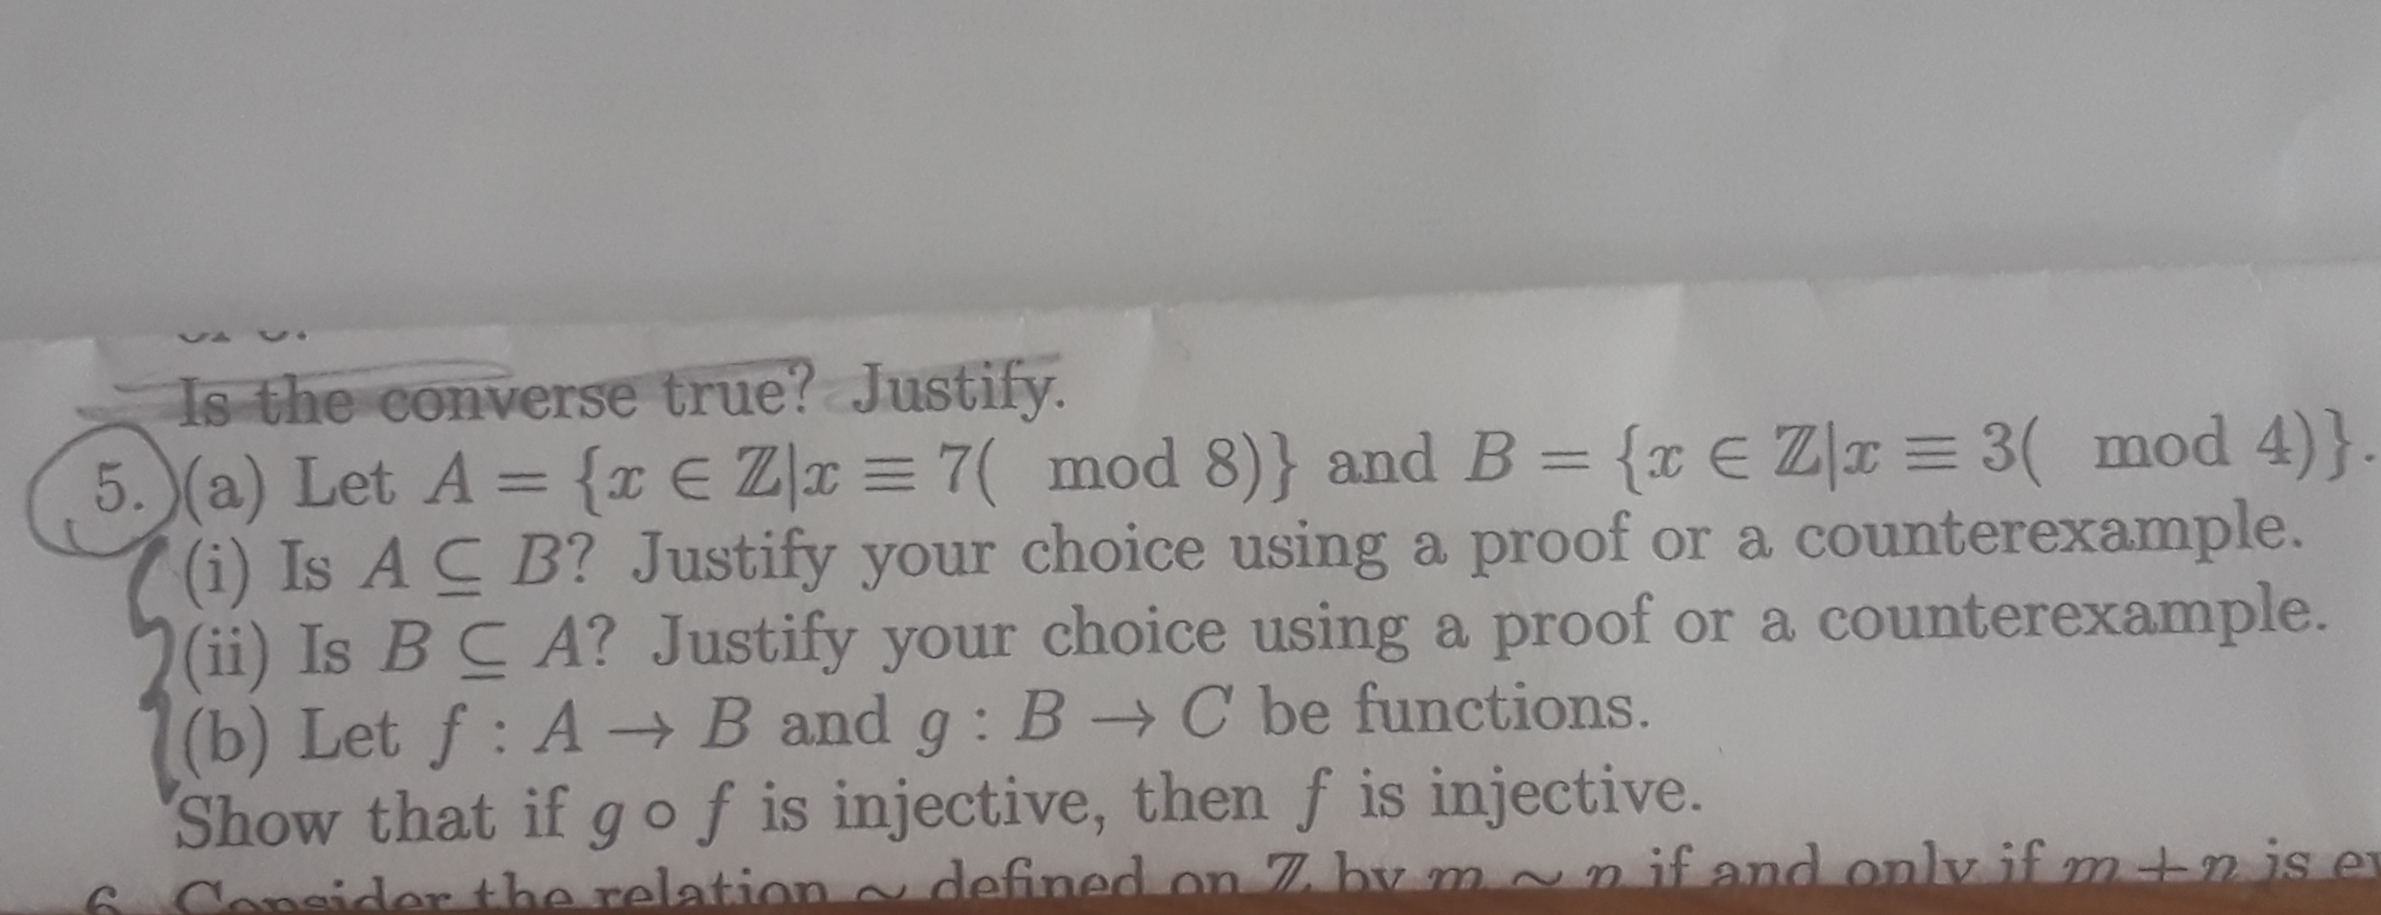 7(i) Is AC B? Justify your choice using a proof or a counterexample.
(i) Is BC A? Justify your choice using a proof or a counterexample.
(b) Let f: A→B and g : B → C be functions.
Show that if gof is injective, then f is injective.
dofinod on 7 by mon if and only if m+n is e
ev
